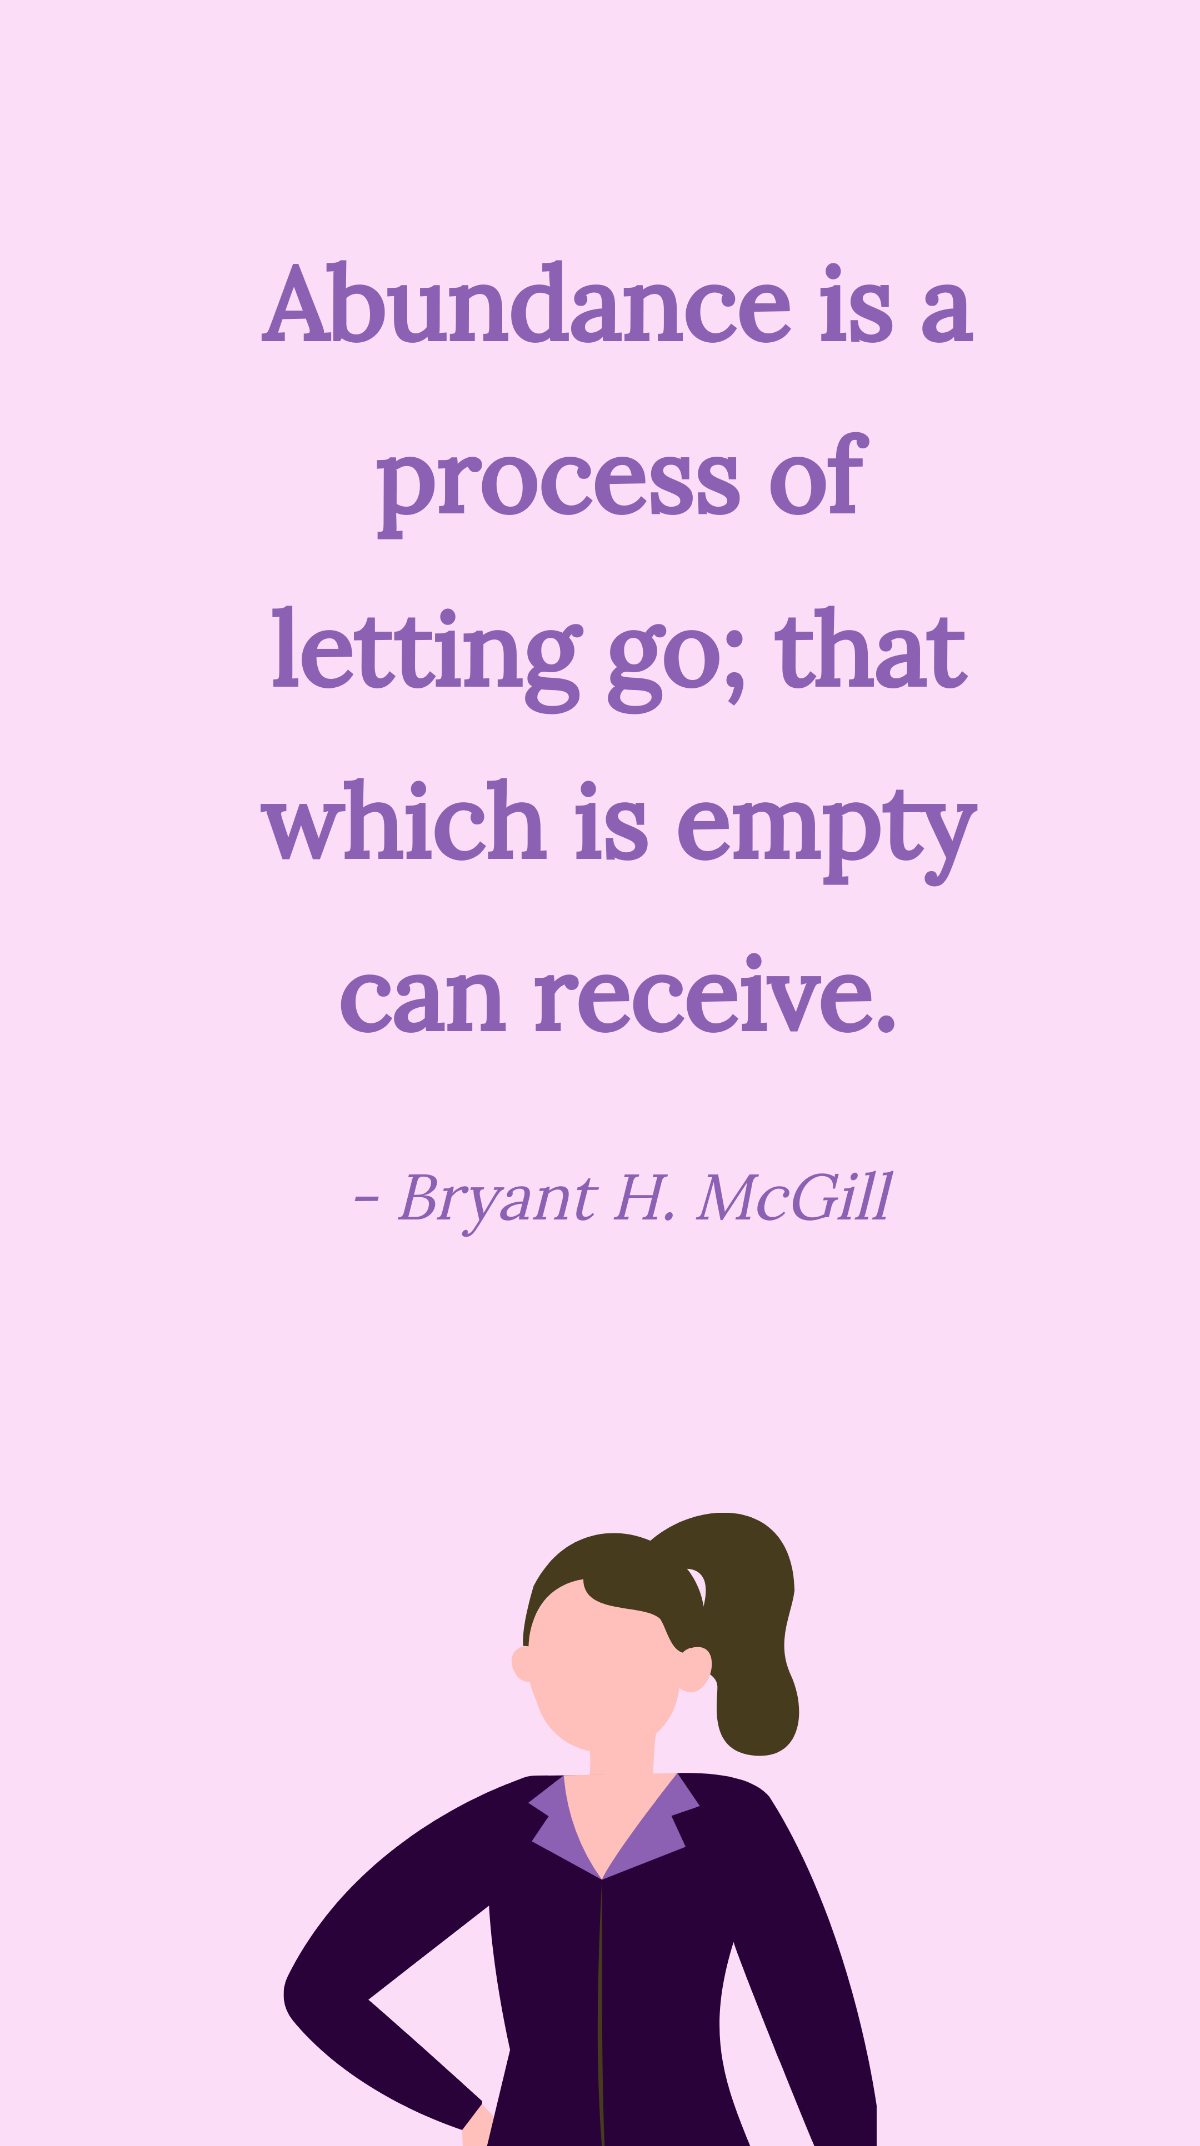 Free Bryant H. McGill - Abundance is a process of letting go; that which is empty can receive. Template